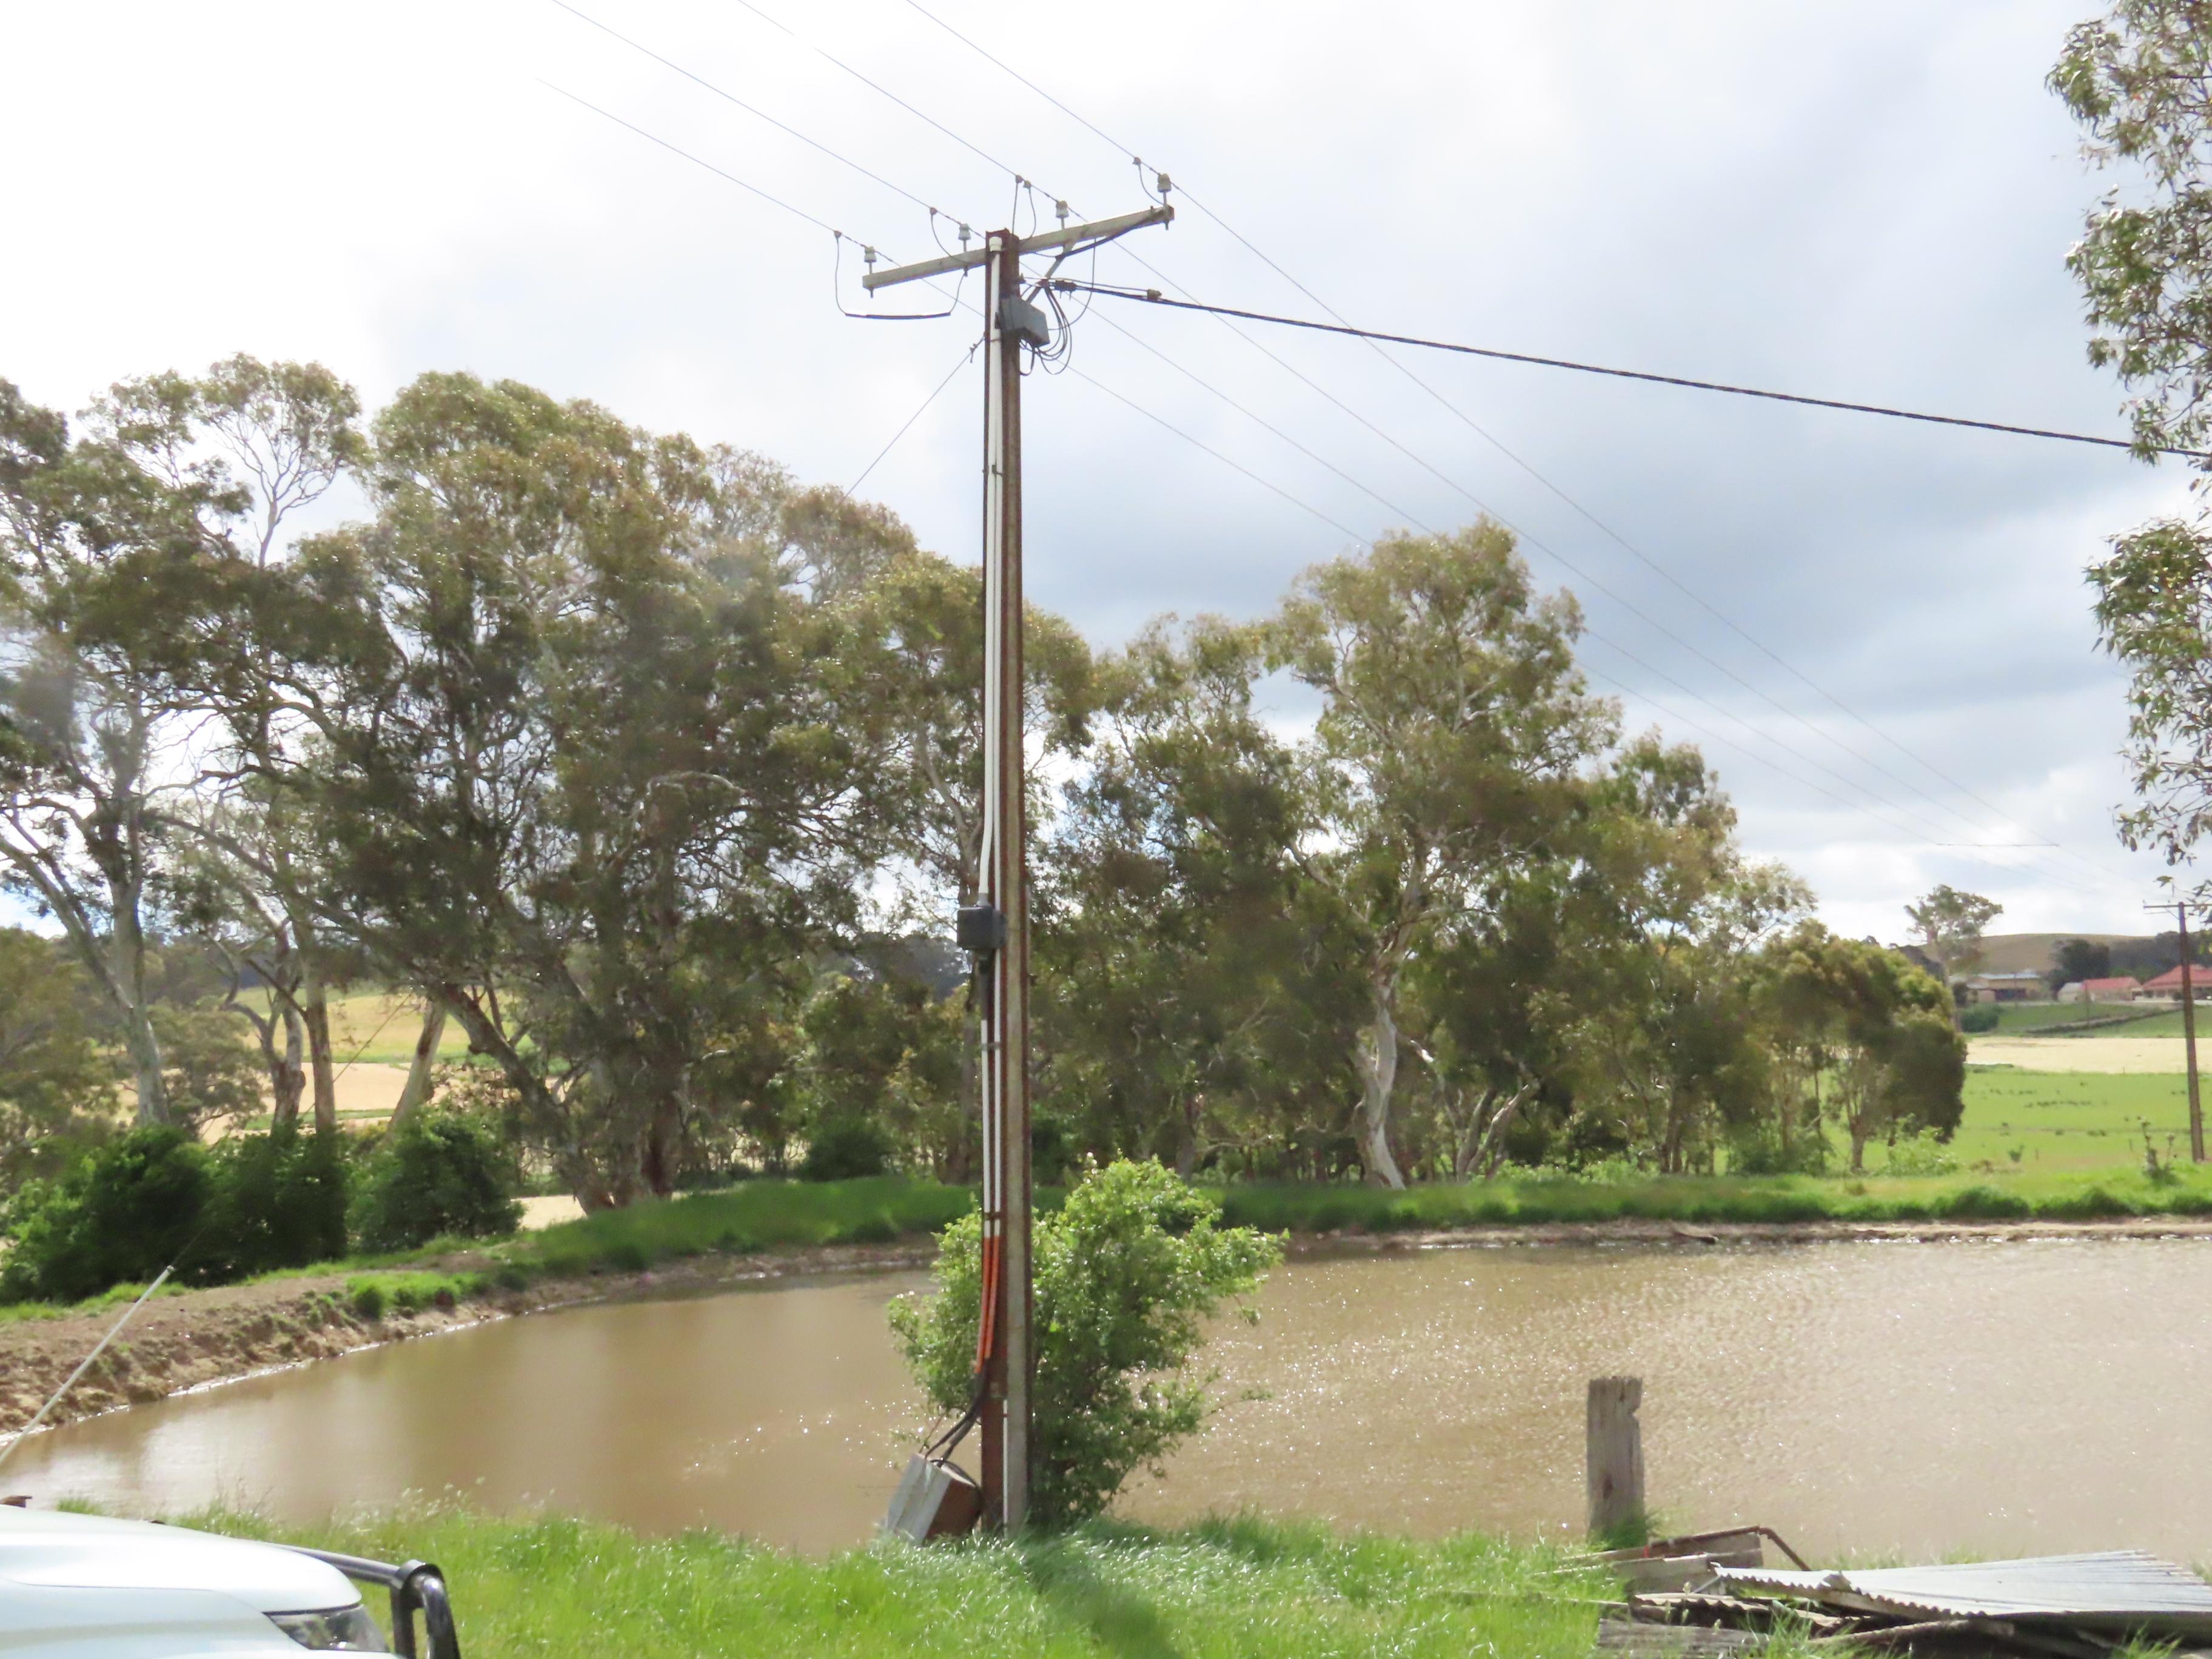 Privately-owned pole near pond damage